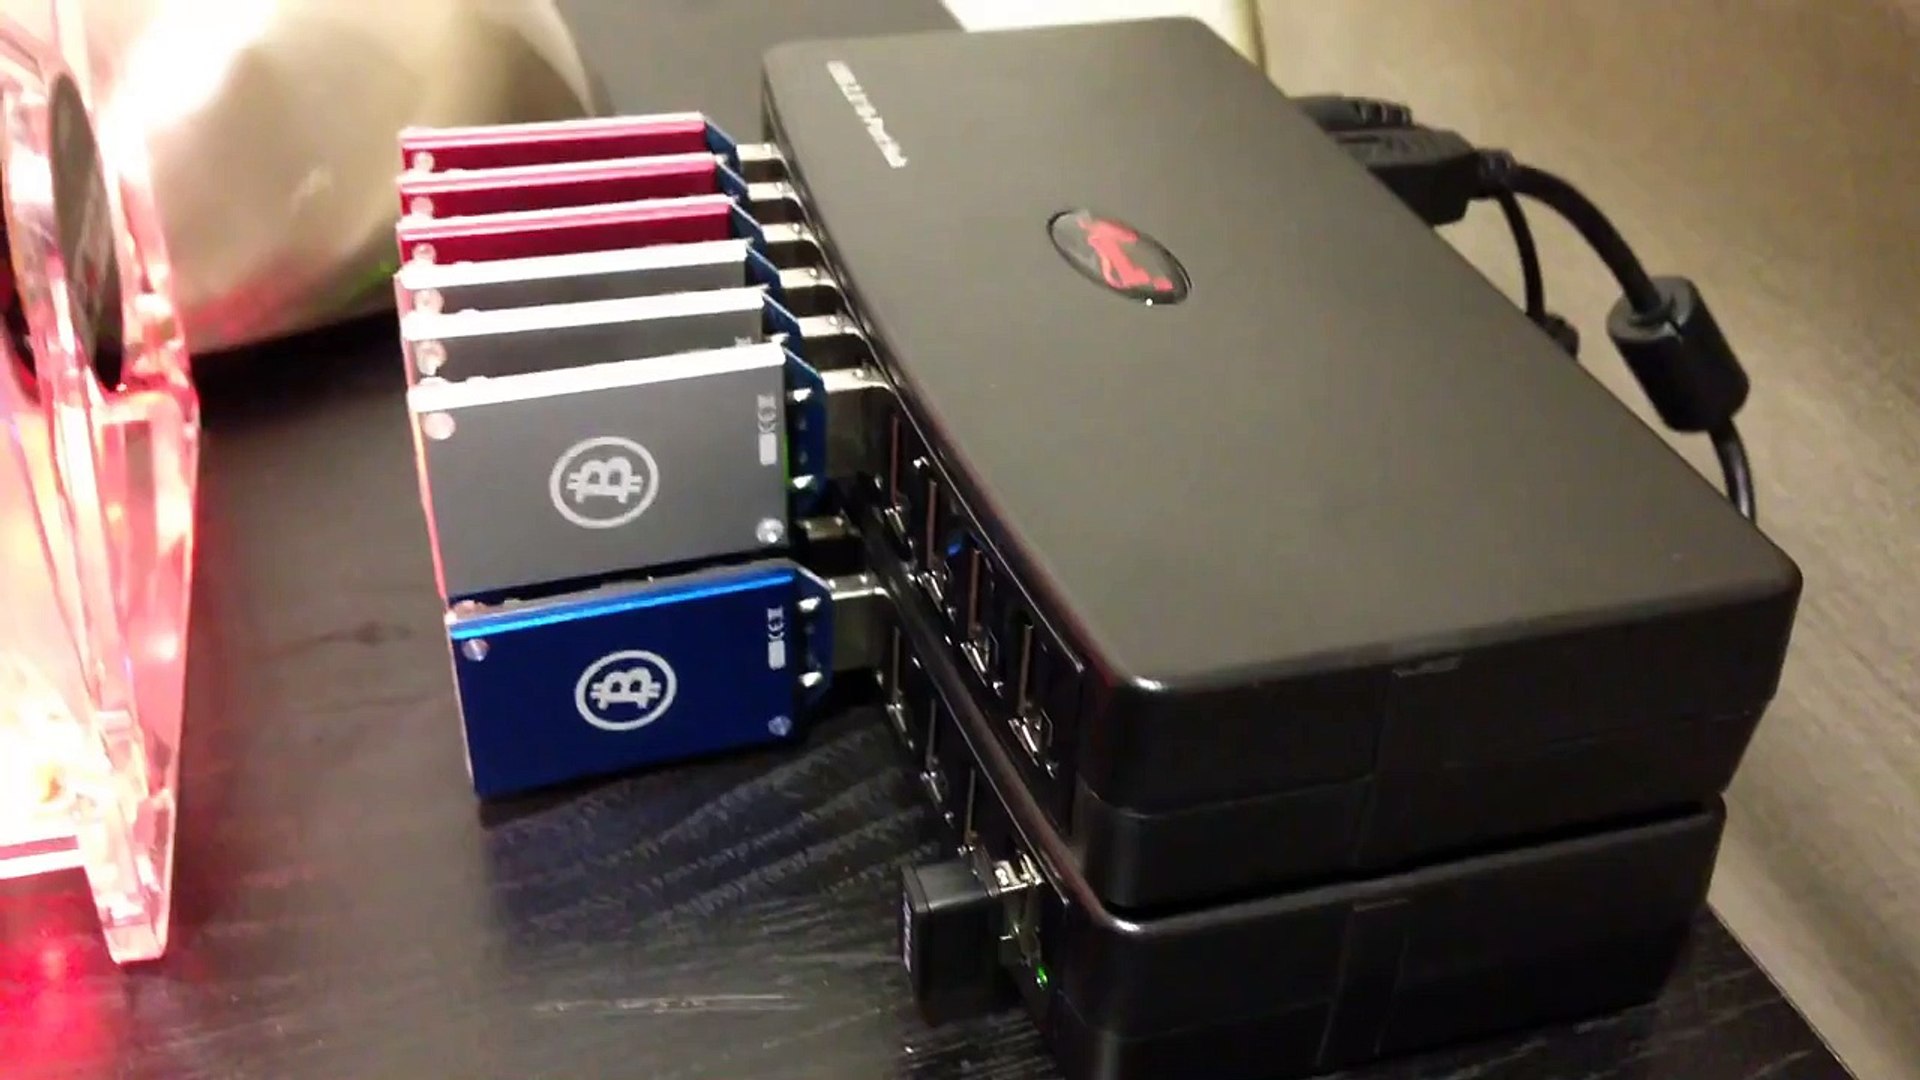 4 GH/s Raspberry PI Bitcoin Miner - PiMiner - video Dailymotion